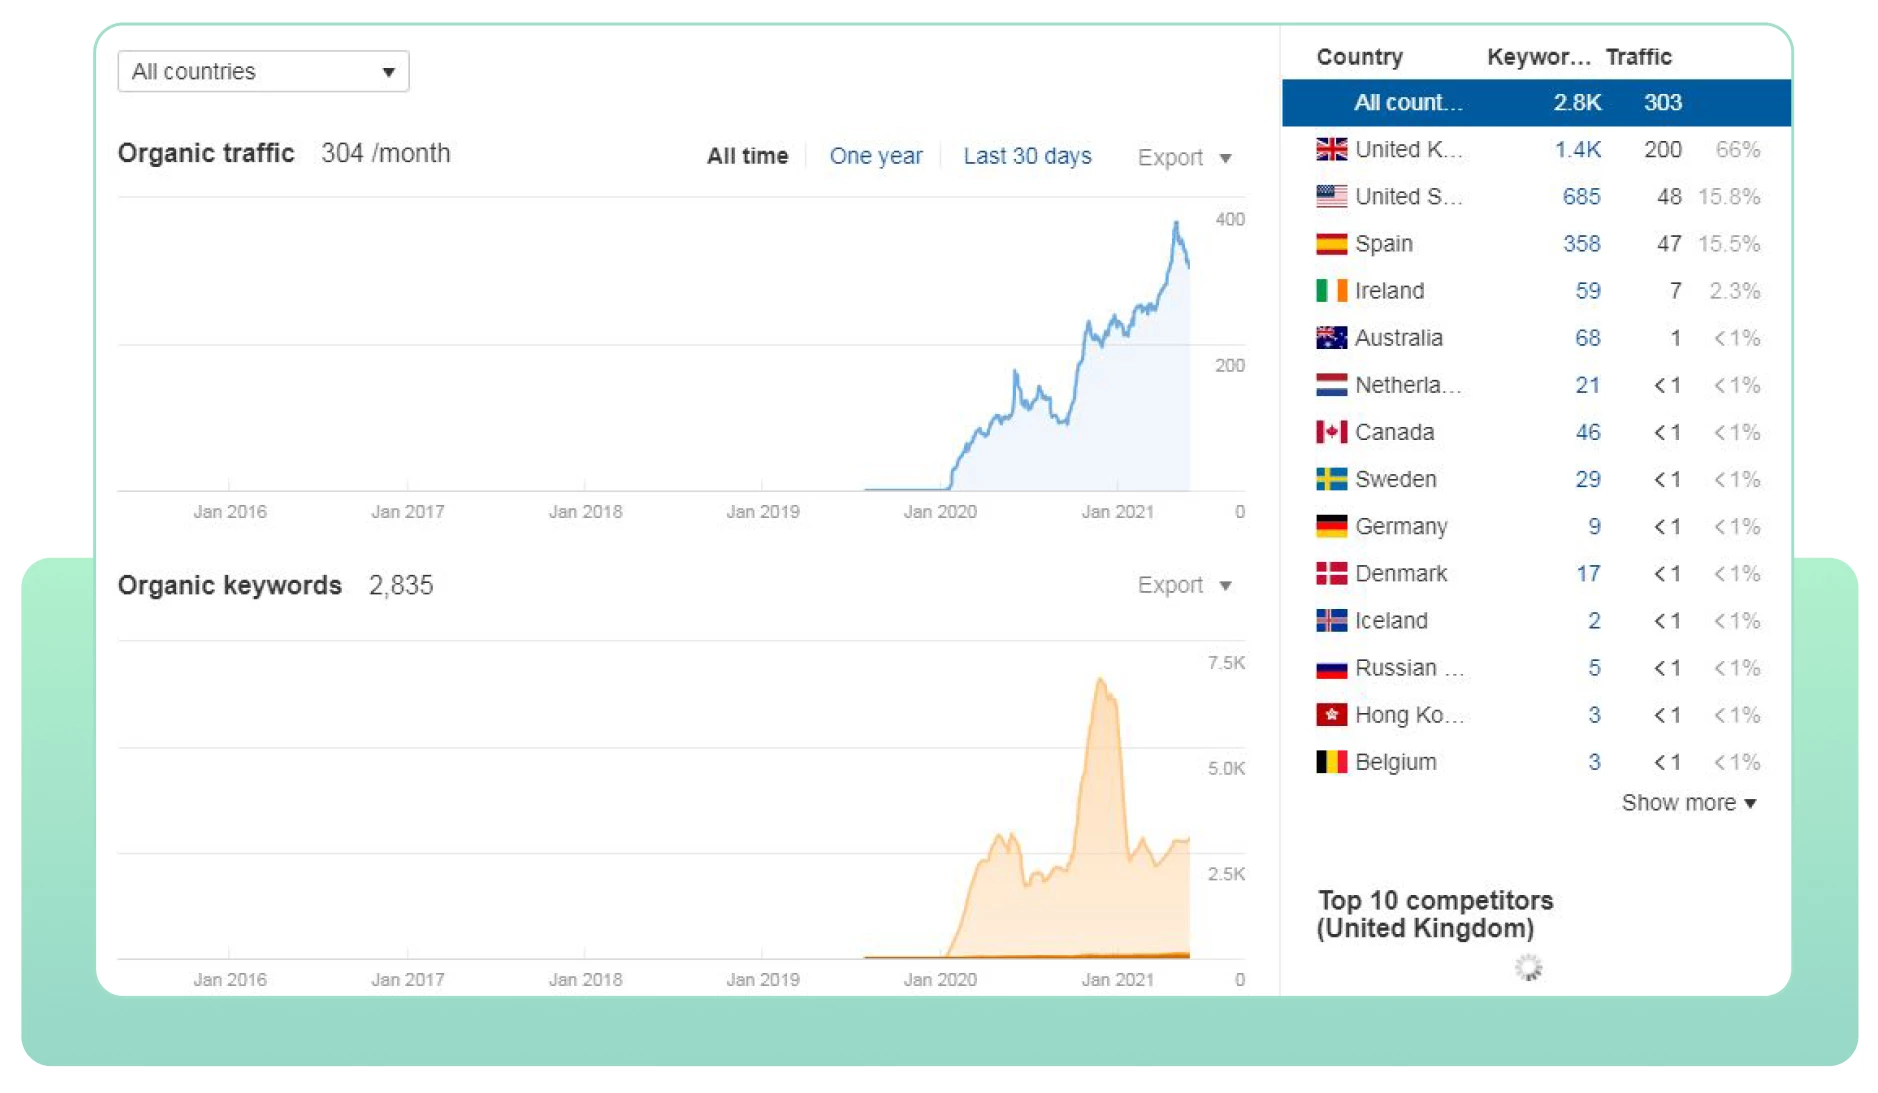 Organic traffic from UK and US